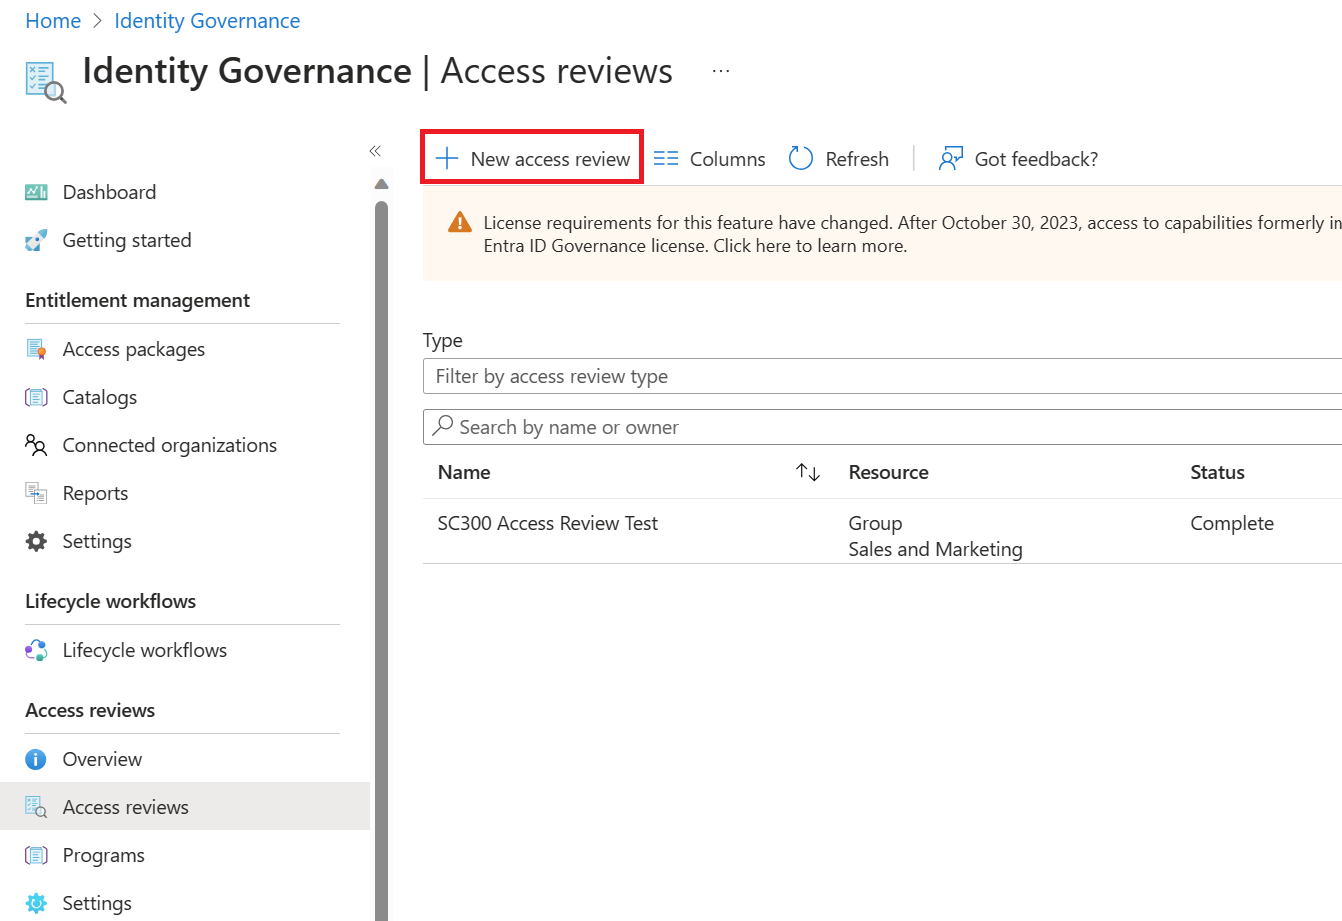 Screenshot of the Access reviews pane in Identity Governance.